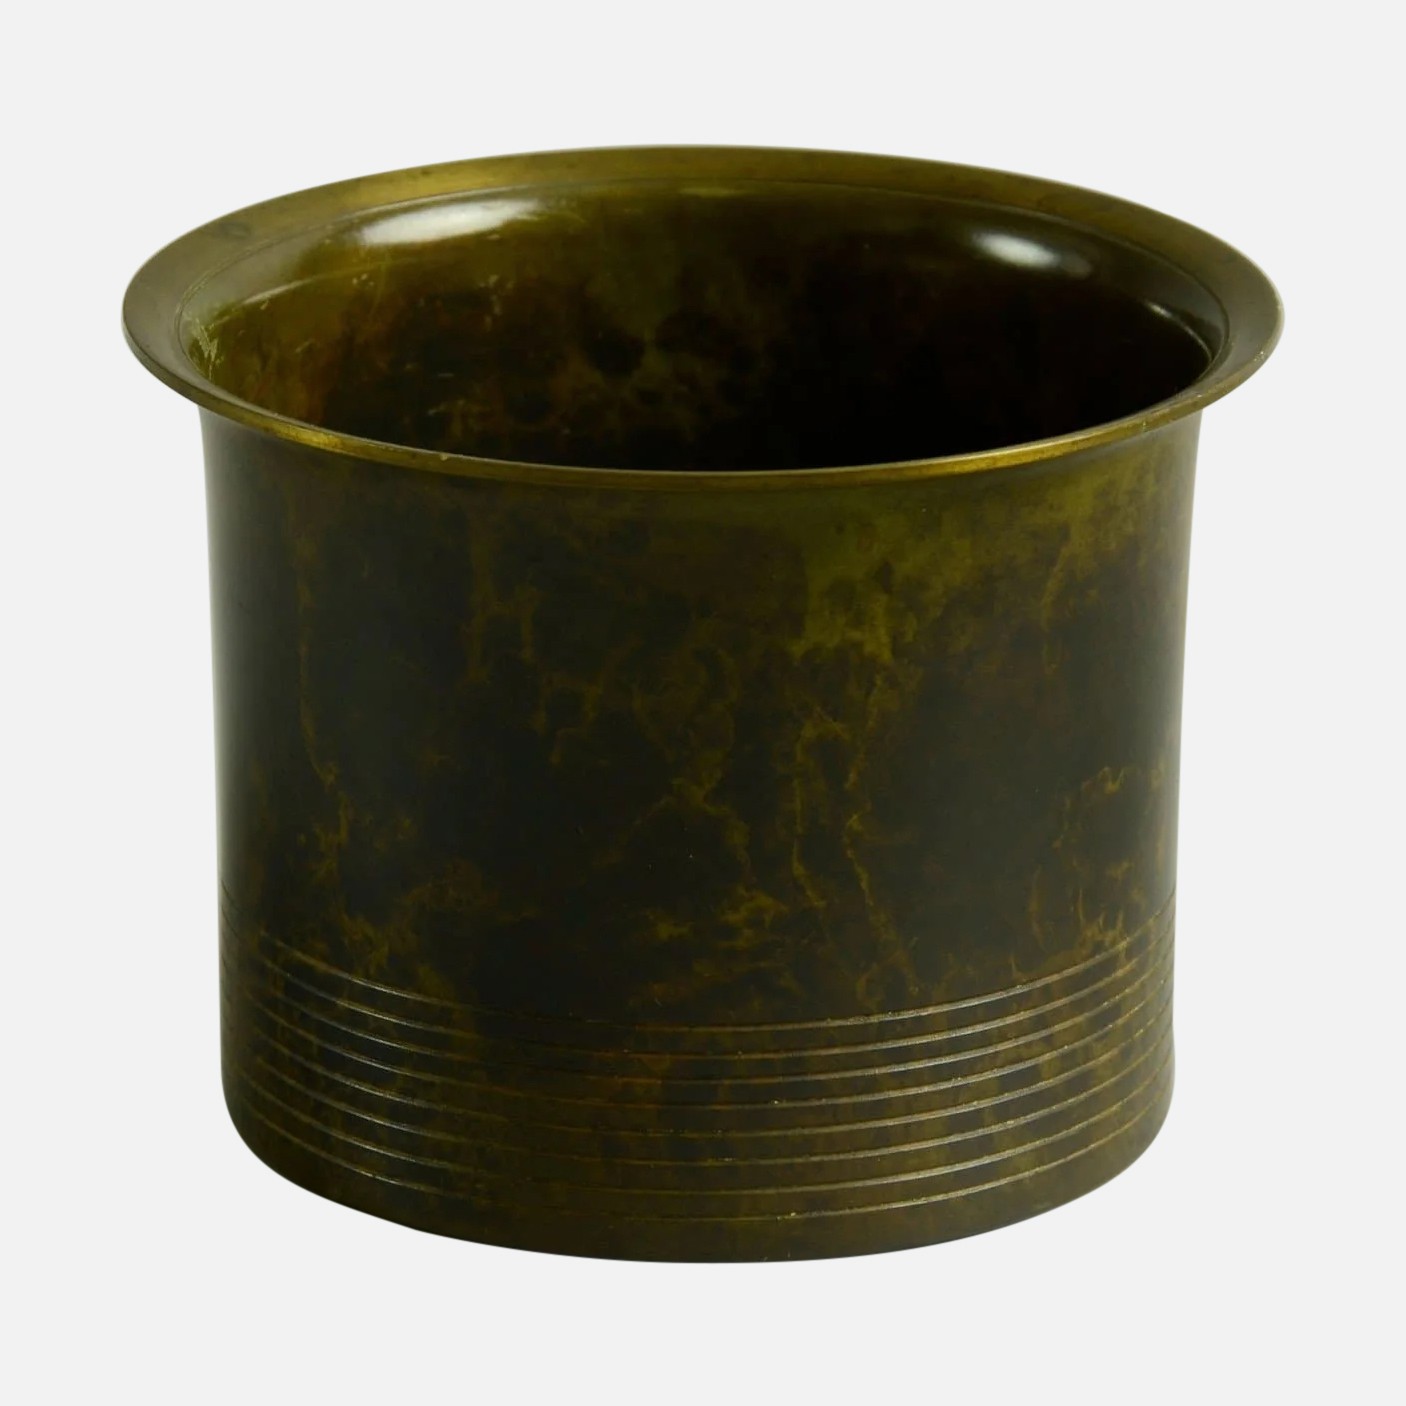 a round metal container with a brown pattered finish